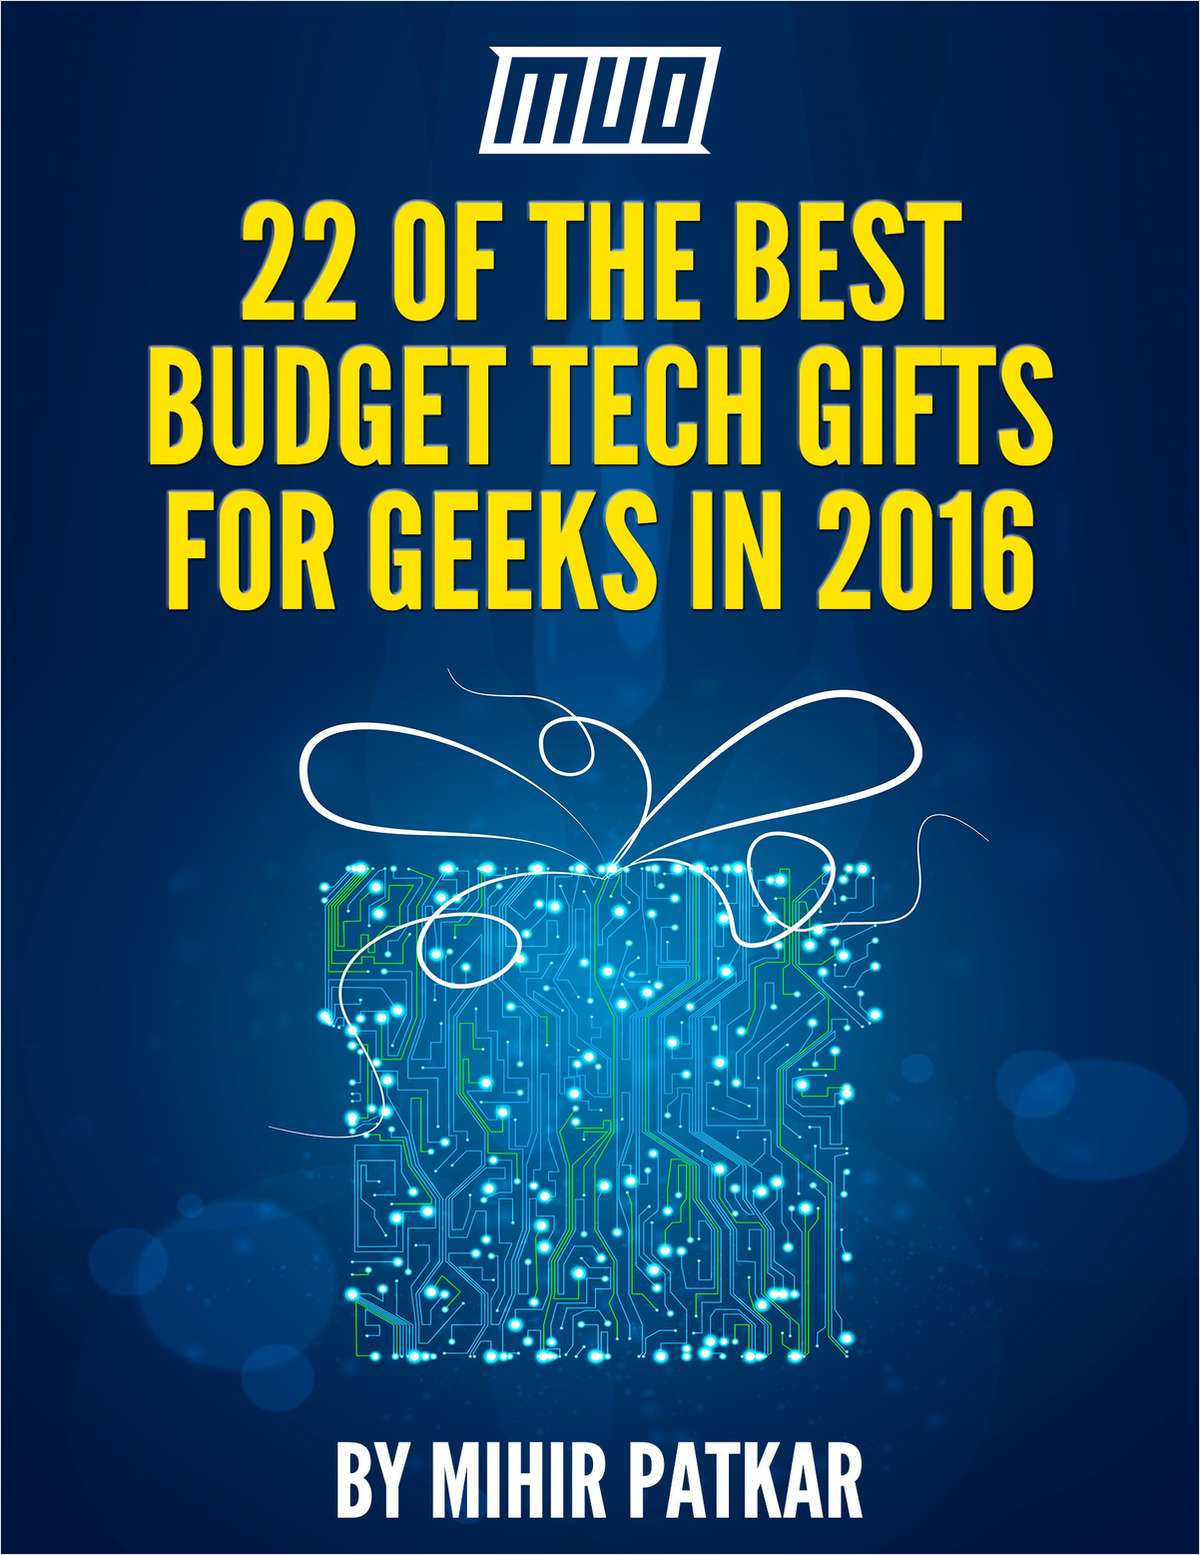 22 of the Best Budget Tech Gifts for Geeks in 2016